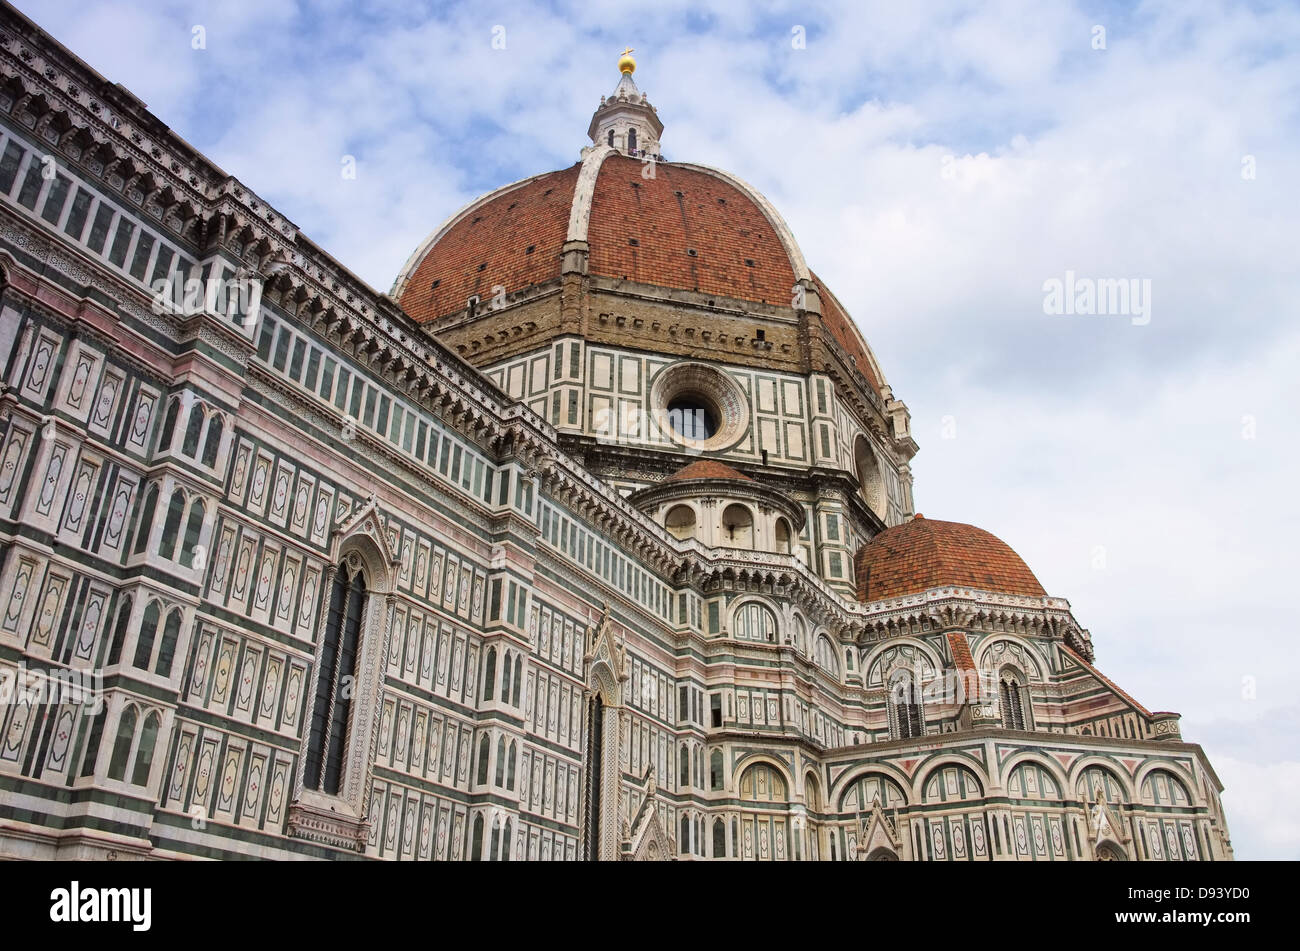 Florenz Dom - Florence cathedral 04 Stock Photo